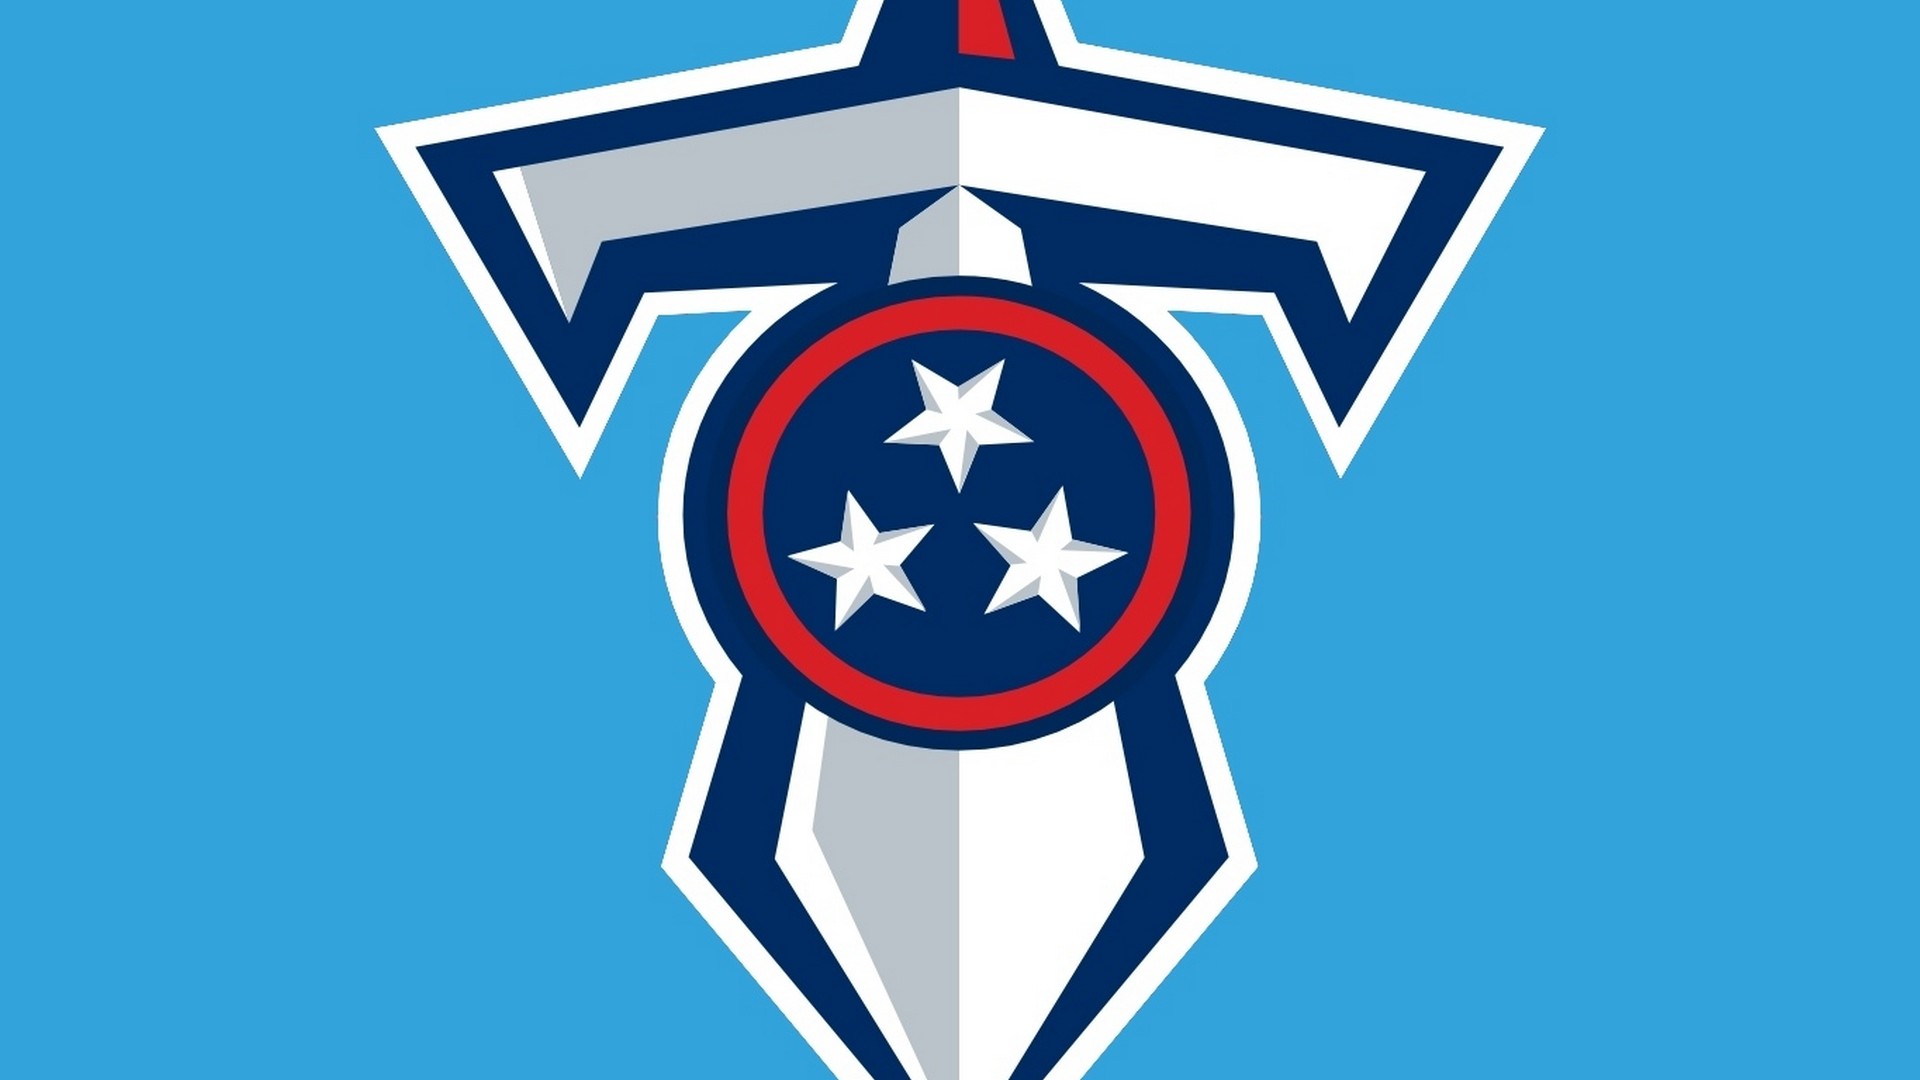 Tennessee Titans For Desktop Wallpaper With high-resolution 1920X1080 pixel. You can use this wallpaper for your Mac or Windows Desktop Background, iPhone, Android or Tablet and another Smartphone device